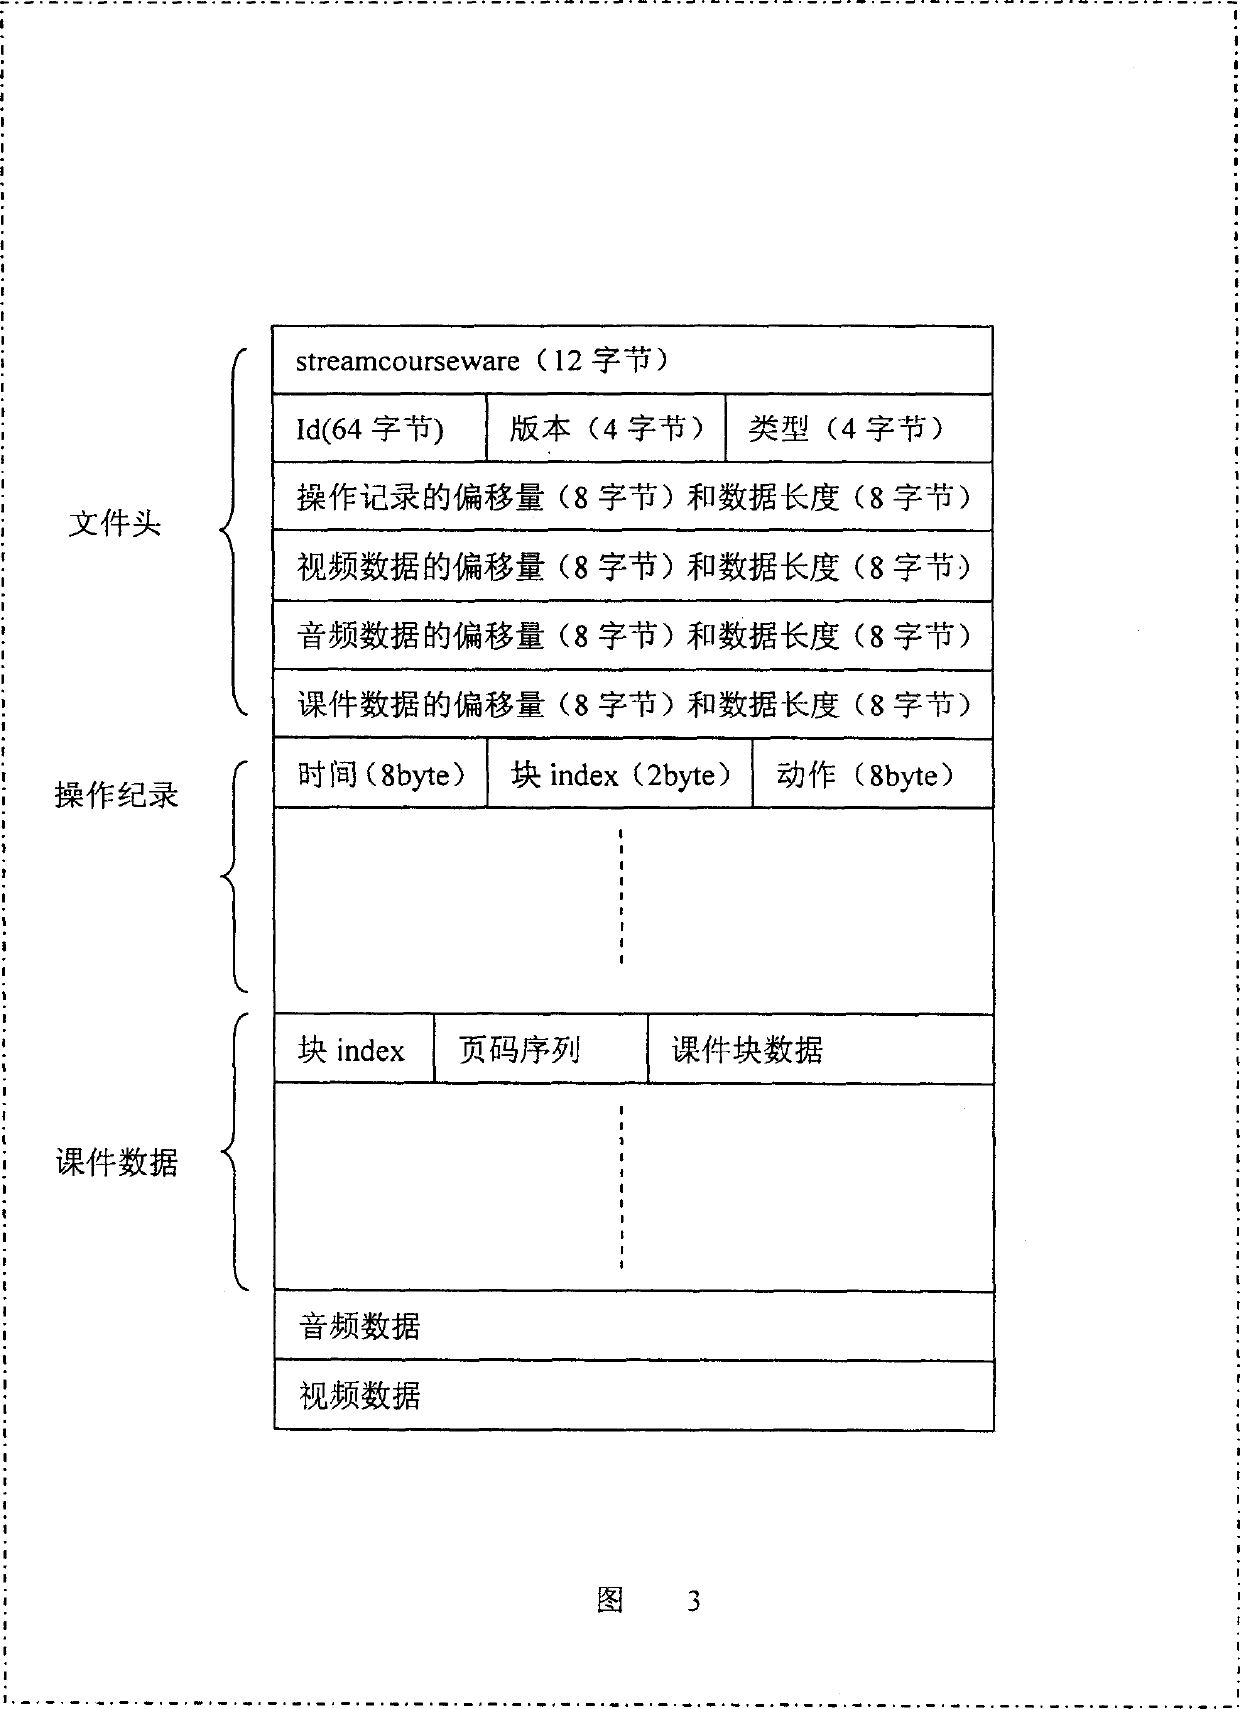 Networked, multimedia synchronous composed storage and issuance system, and method for implementing the system